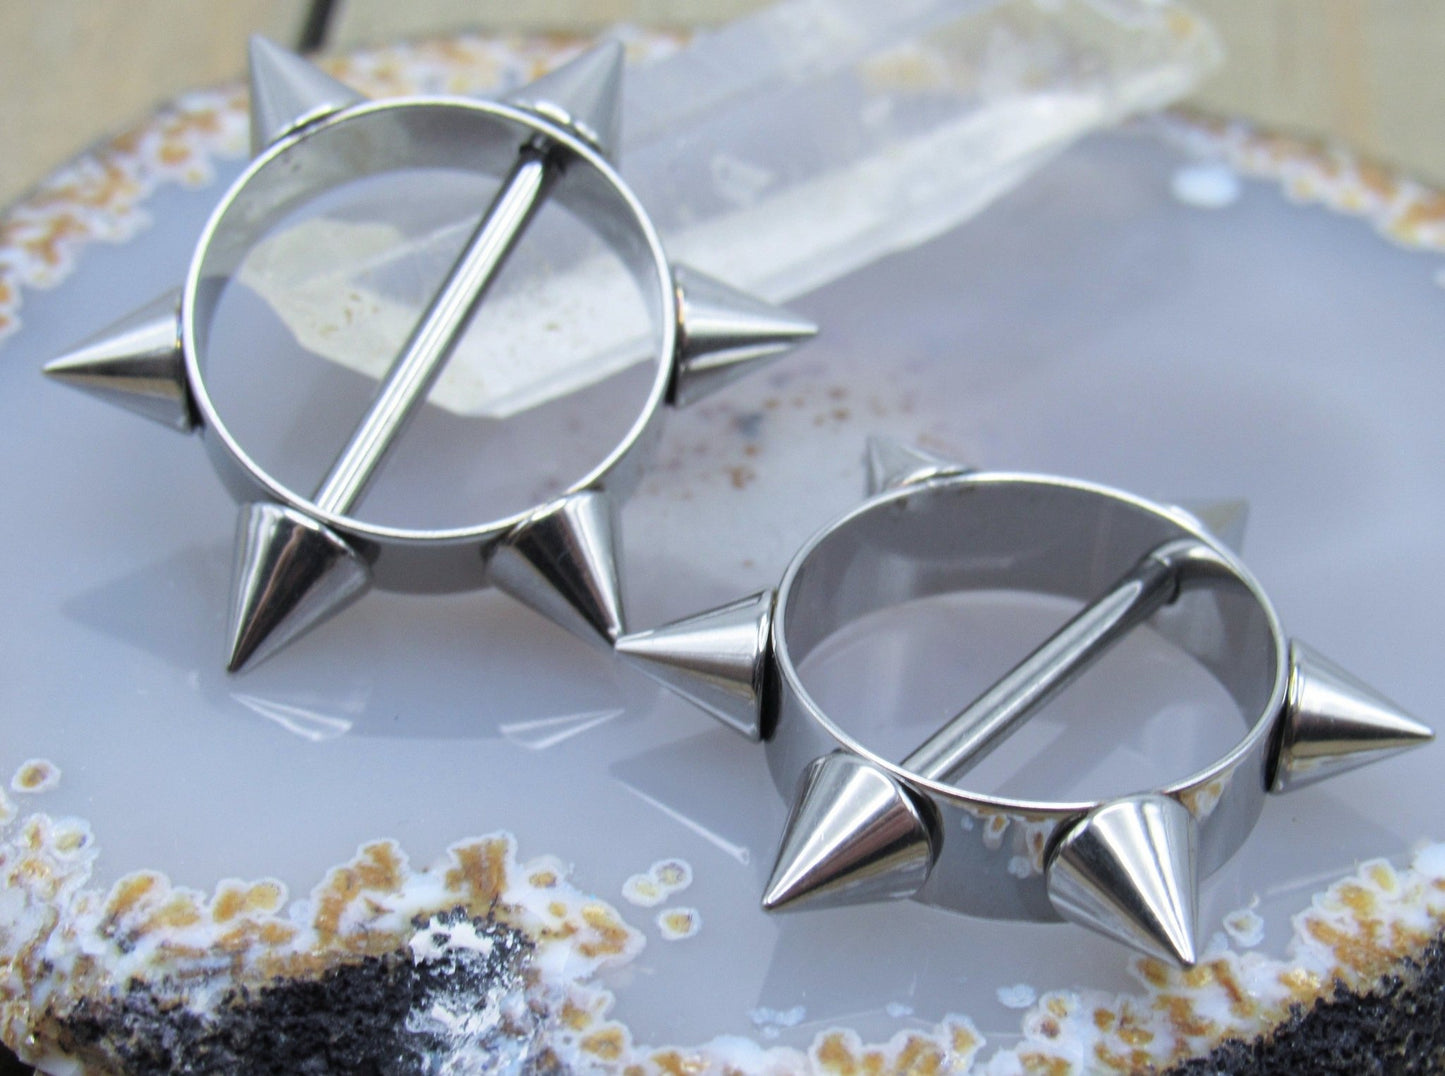 Silver spikes nipple piercing shield set 14g silver 316L stainless steel straight externally threaded bars - Siren Body Jewelry